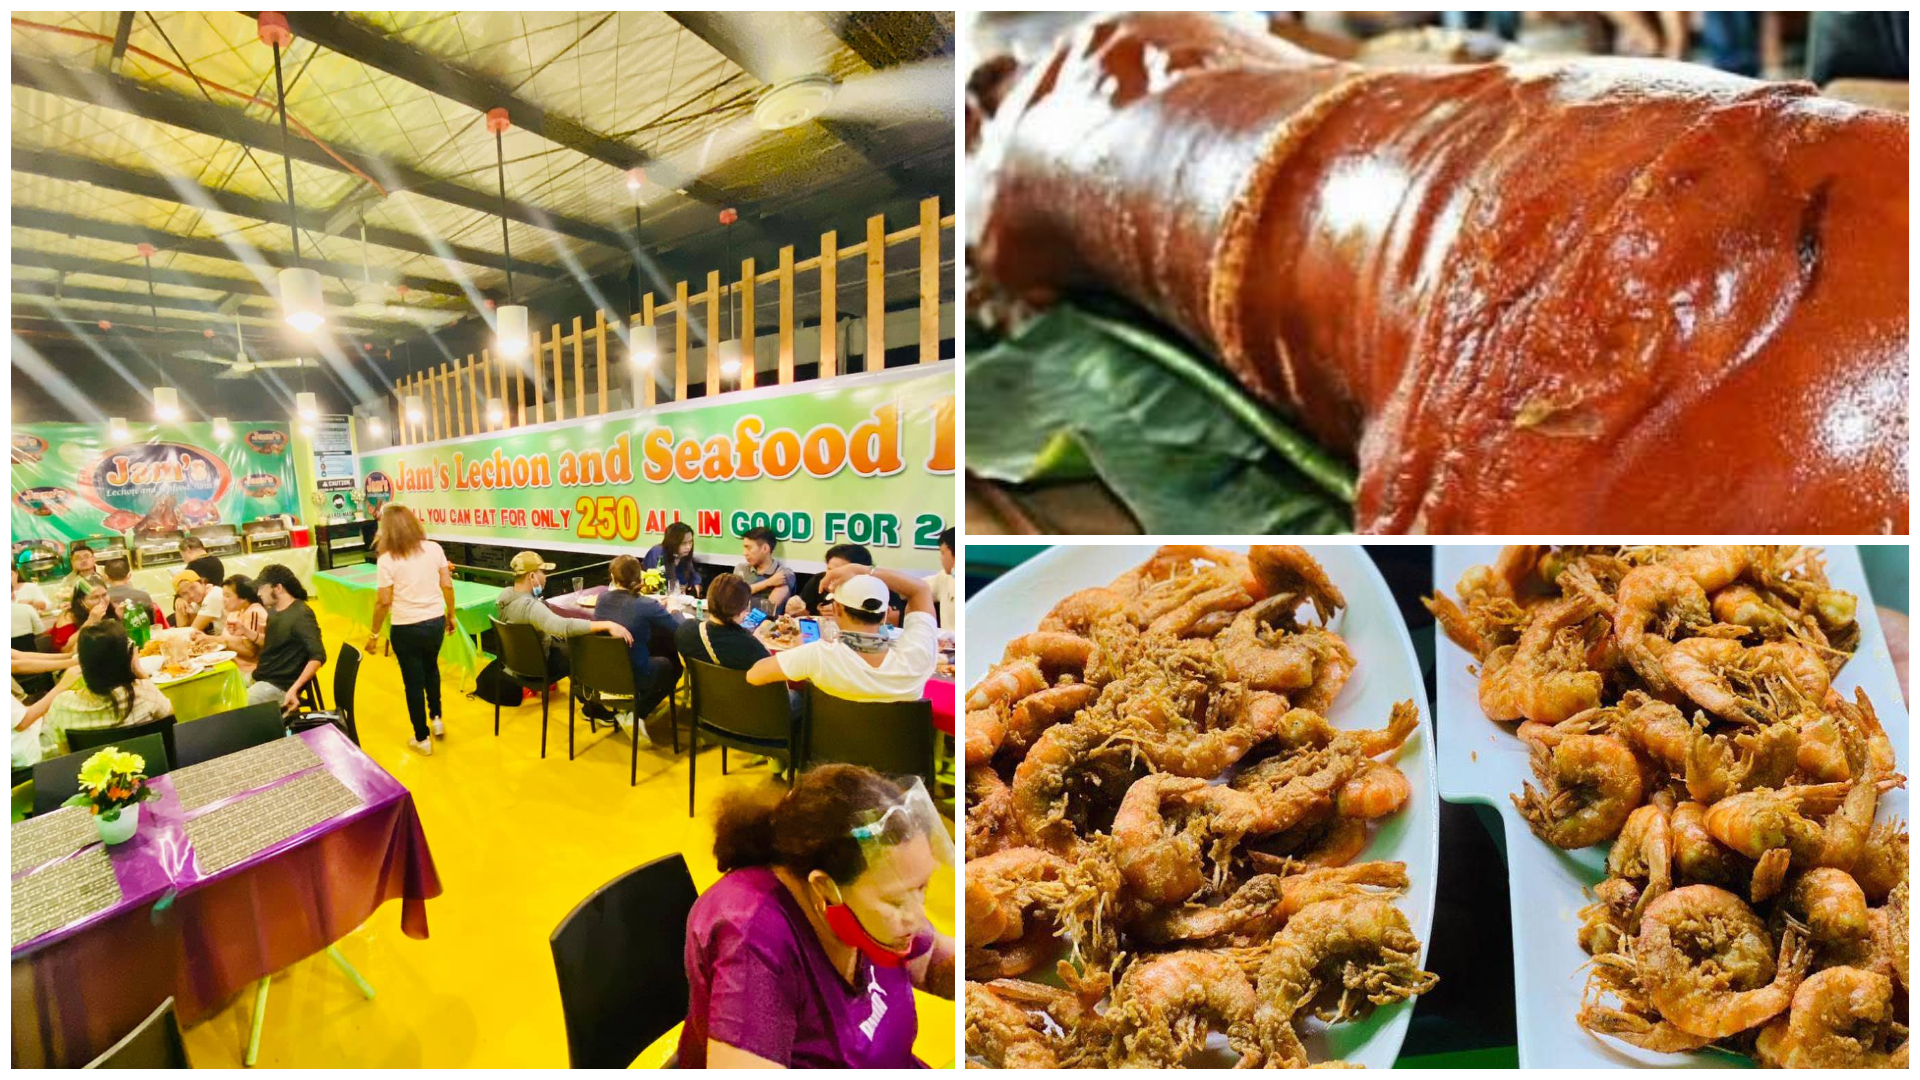 2 Jam's Lechon and Seafood Haus cebu Unlimited